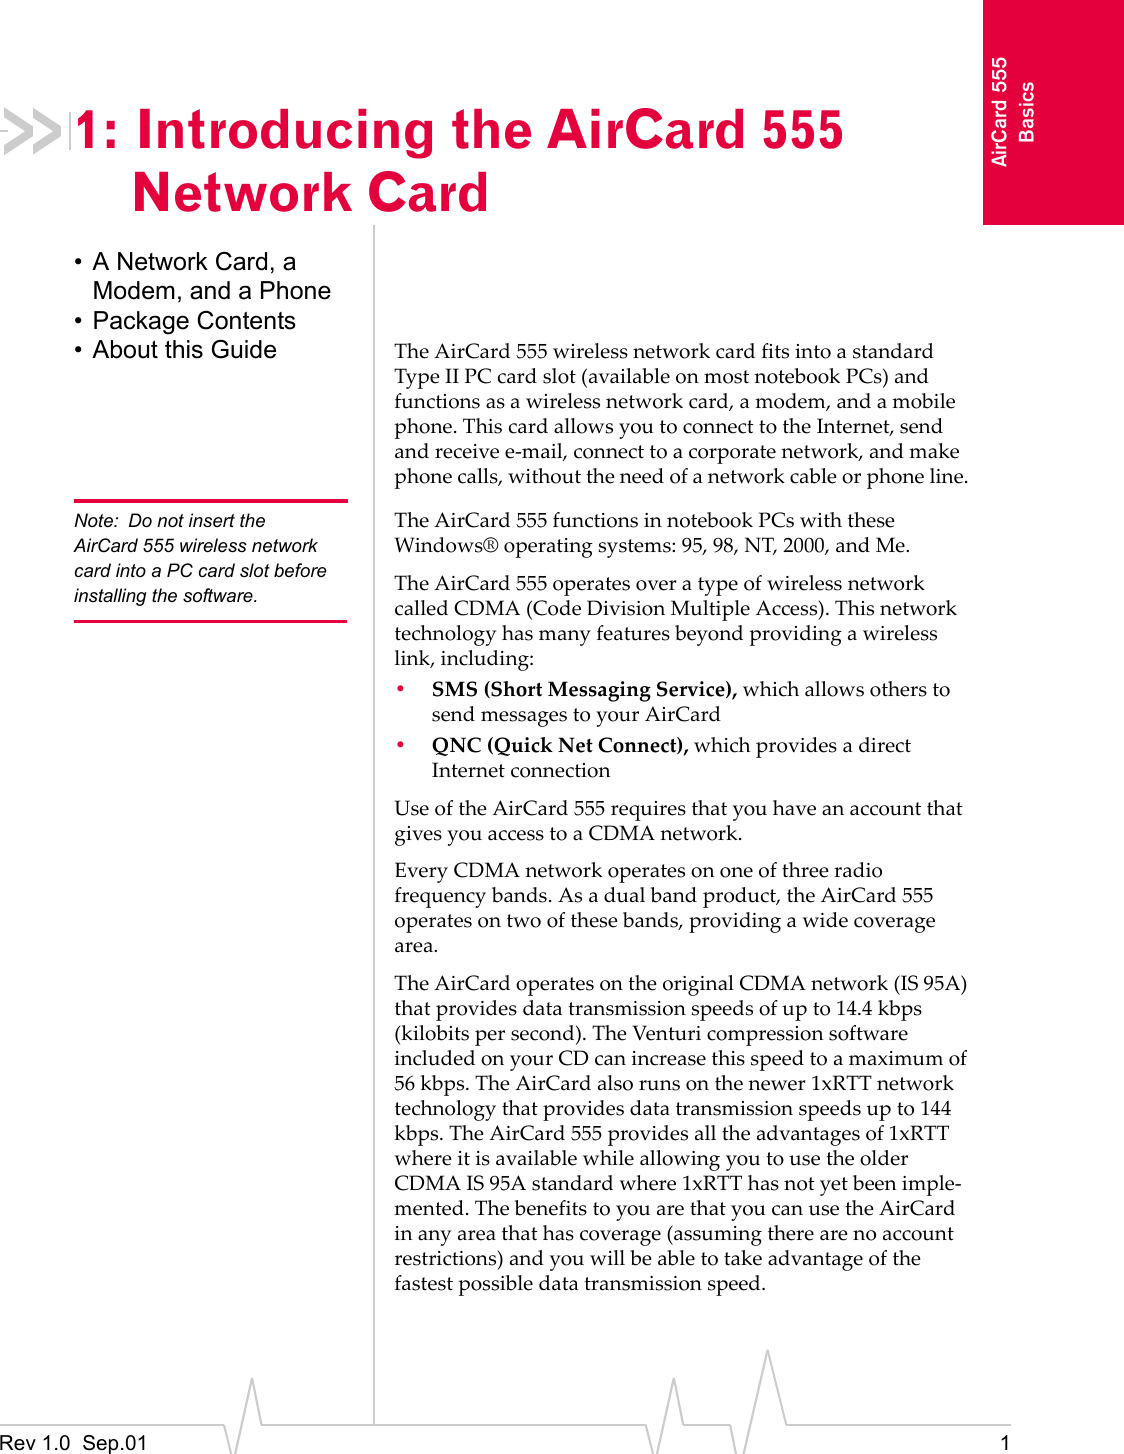 Rev 1.0  Sep.01 1AirCard 555Basics1: Introducing the AirCard 555 Network Card• A Network Card, a Modem, and a Phone• Package Contents• About this Guide The AirCard 555 wireless network card fits into a standard Type II PC card slot (available on most notebook PCs) and functions as a wireless network card, a modem, and a mobile phone. This card allows you to connect to the Internet, send and receive e-mail, connect to a corporate network, and make phone calls, without the need of a network cable or phone line. Note: Do not insert the AirCard 555 wireless network card into a PC card slot before installing the software.The AirCard 555 functions in notebook PCs with these Windows® operating systems: 95, 98, NT, 2000, and Me.The AirCard 555 operates over a type of wireless network called CDMA (Code Division Multiple Access). This network technology has many features beyond providing a wireless link, including:•SMS (Short Messaging Service), which allows others to send messages to your AirCard •QNC (Quick Net Connect), which provides a direct Internet connectionUse of the AirCard 555 requires that you have an account that gives you access to a CDMA network. Every CDMA network operates on one of three radio frequency bands. As a dual band product, the AirCard 555 operates on two of these bands, providing a wide coverage area.The AirCard operates on the original CDMA network (IS 95A) that provides data transmission speeds of up to 14.4 kbps (kilobits per second). The Venturi compression software included on your CD can increase this speed to a maximum of 56 kbps. The AirCard also runs on the newer 1xRTT network technology that provides data transmission speeds up to 144 kbps. The AirCard 555 provides all the advantages of 1xRTT where it is available while allowing you to use the older CDMA IS 95A standard where 1xRTT has not yet been imple-mented. The benefits to you are that you can use the AirCard in any area that has coverage (assuming there are no account restrictions) and you will be able to take advantage of the fastest possible data transmission speed. 